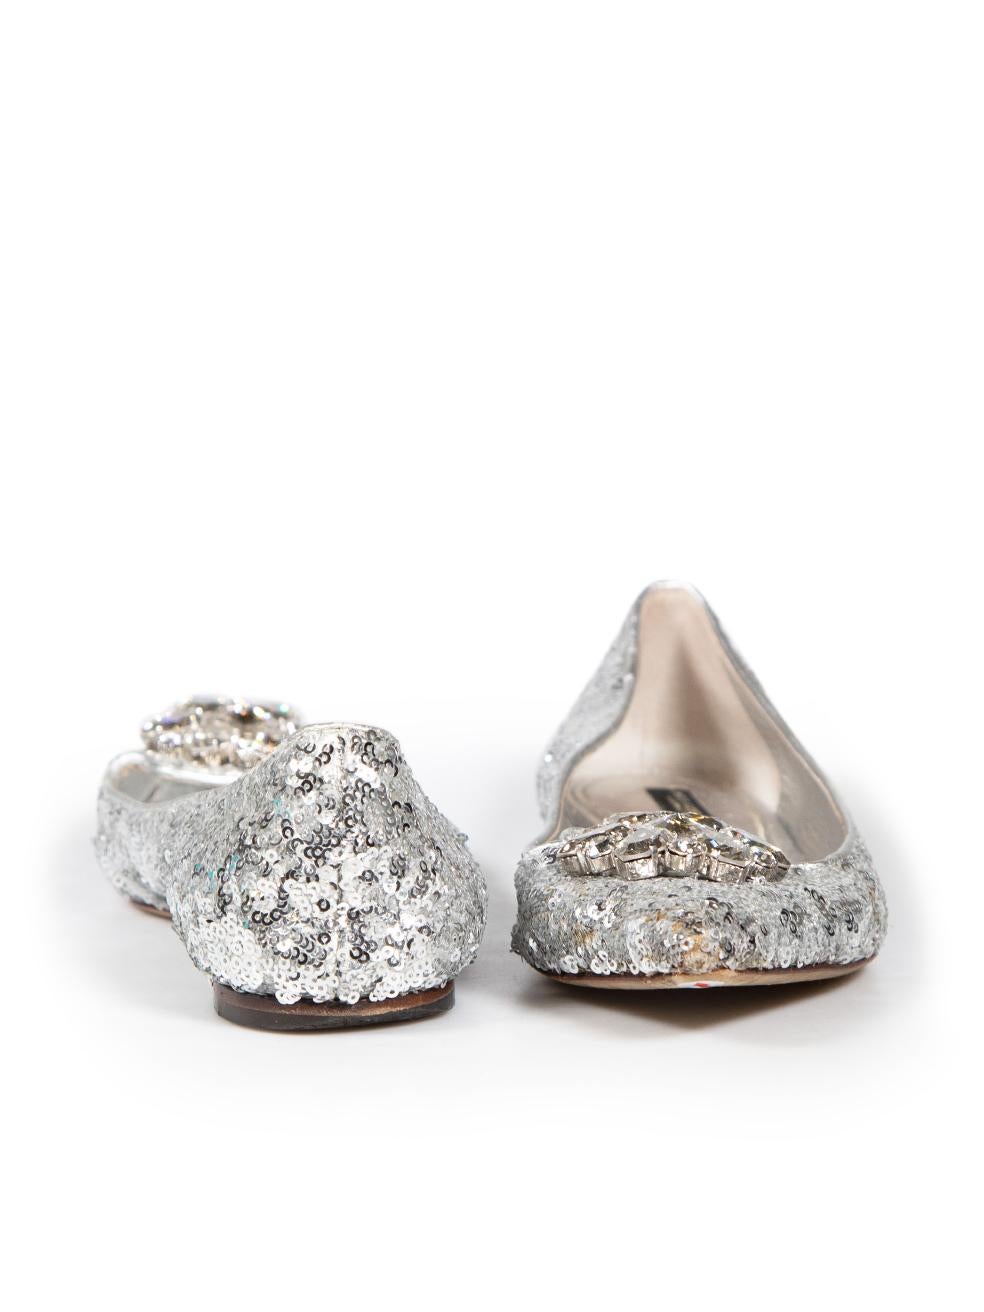 Dolce & Gabbana Silver Crystal Embellished Flats Size IT 37 In Good Condition For Sale In London, GB